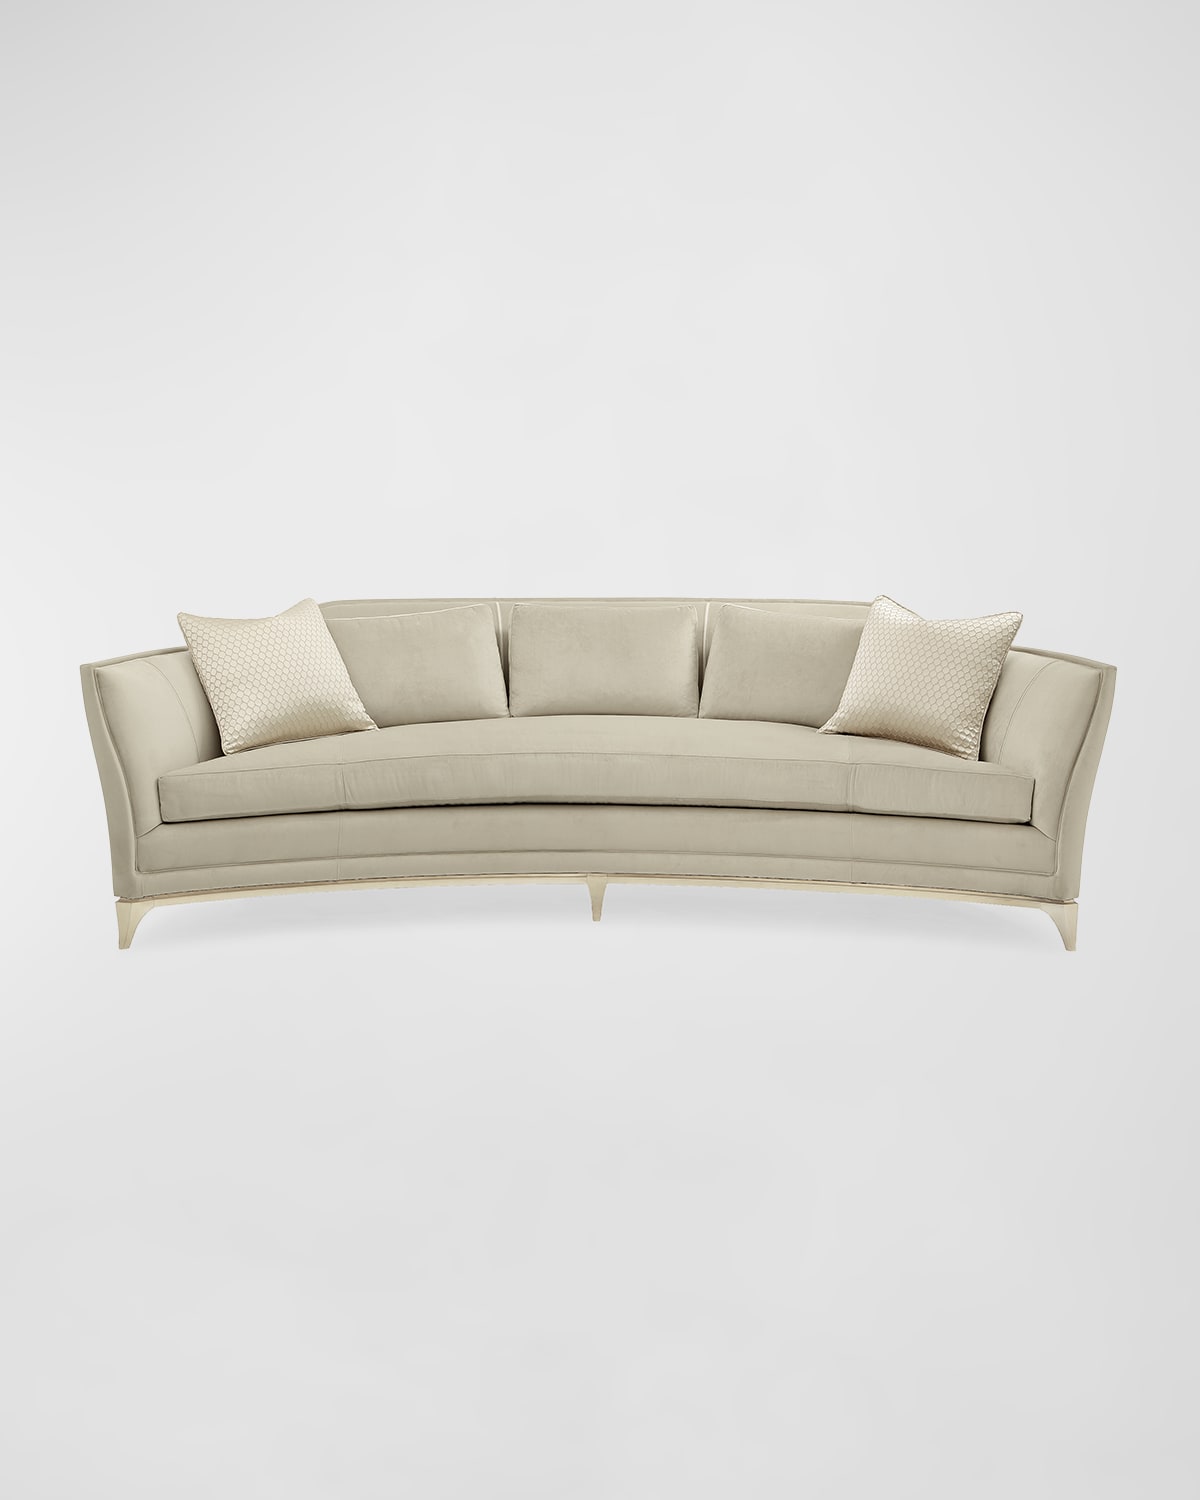 Bend The Rules Sofa, 104"